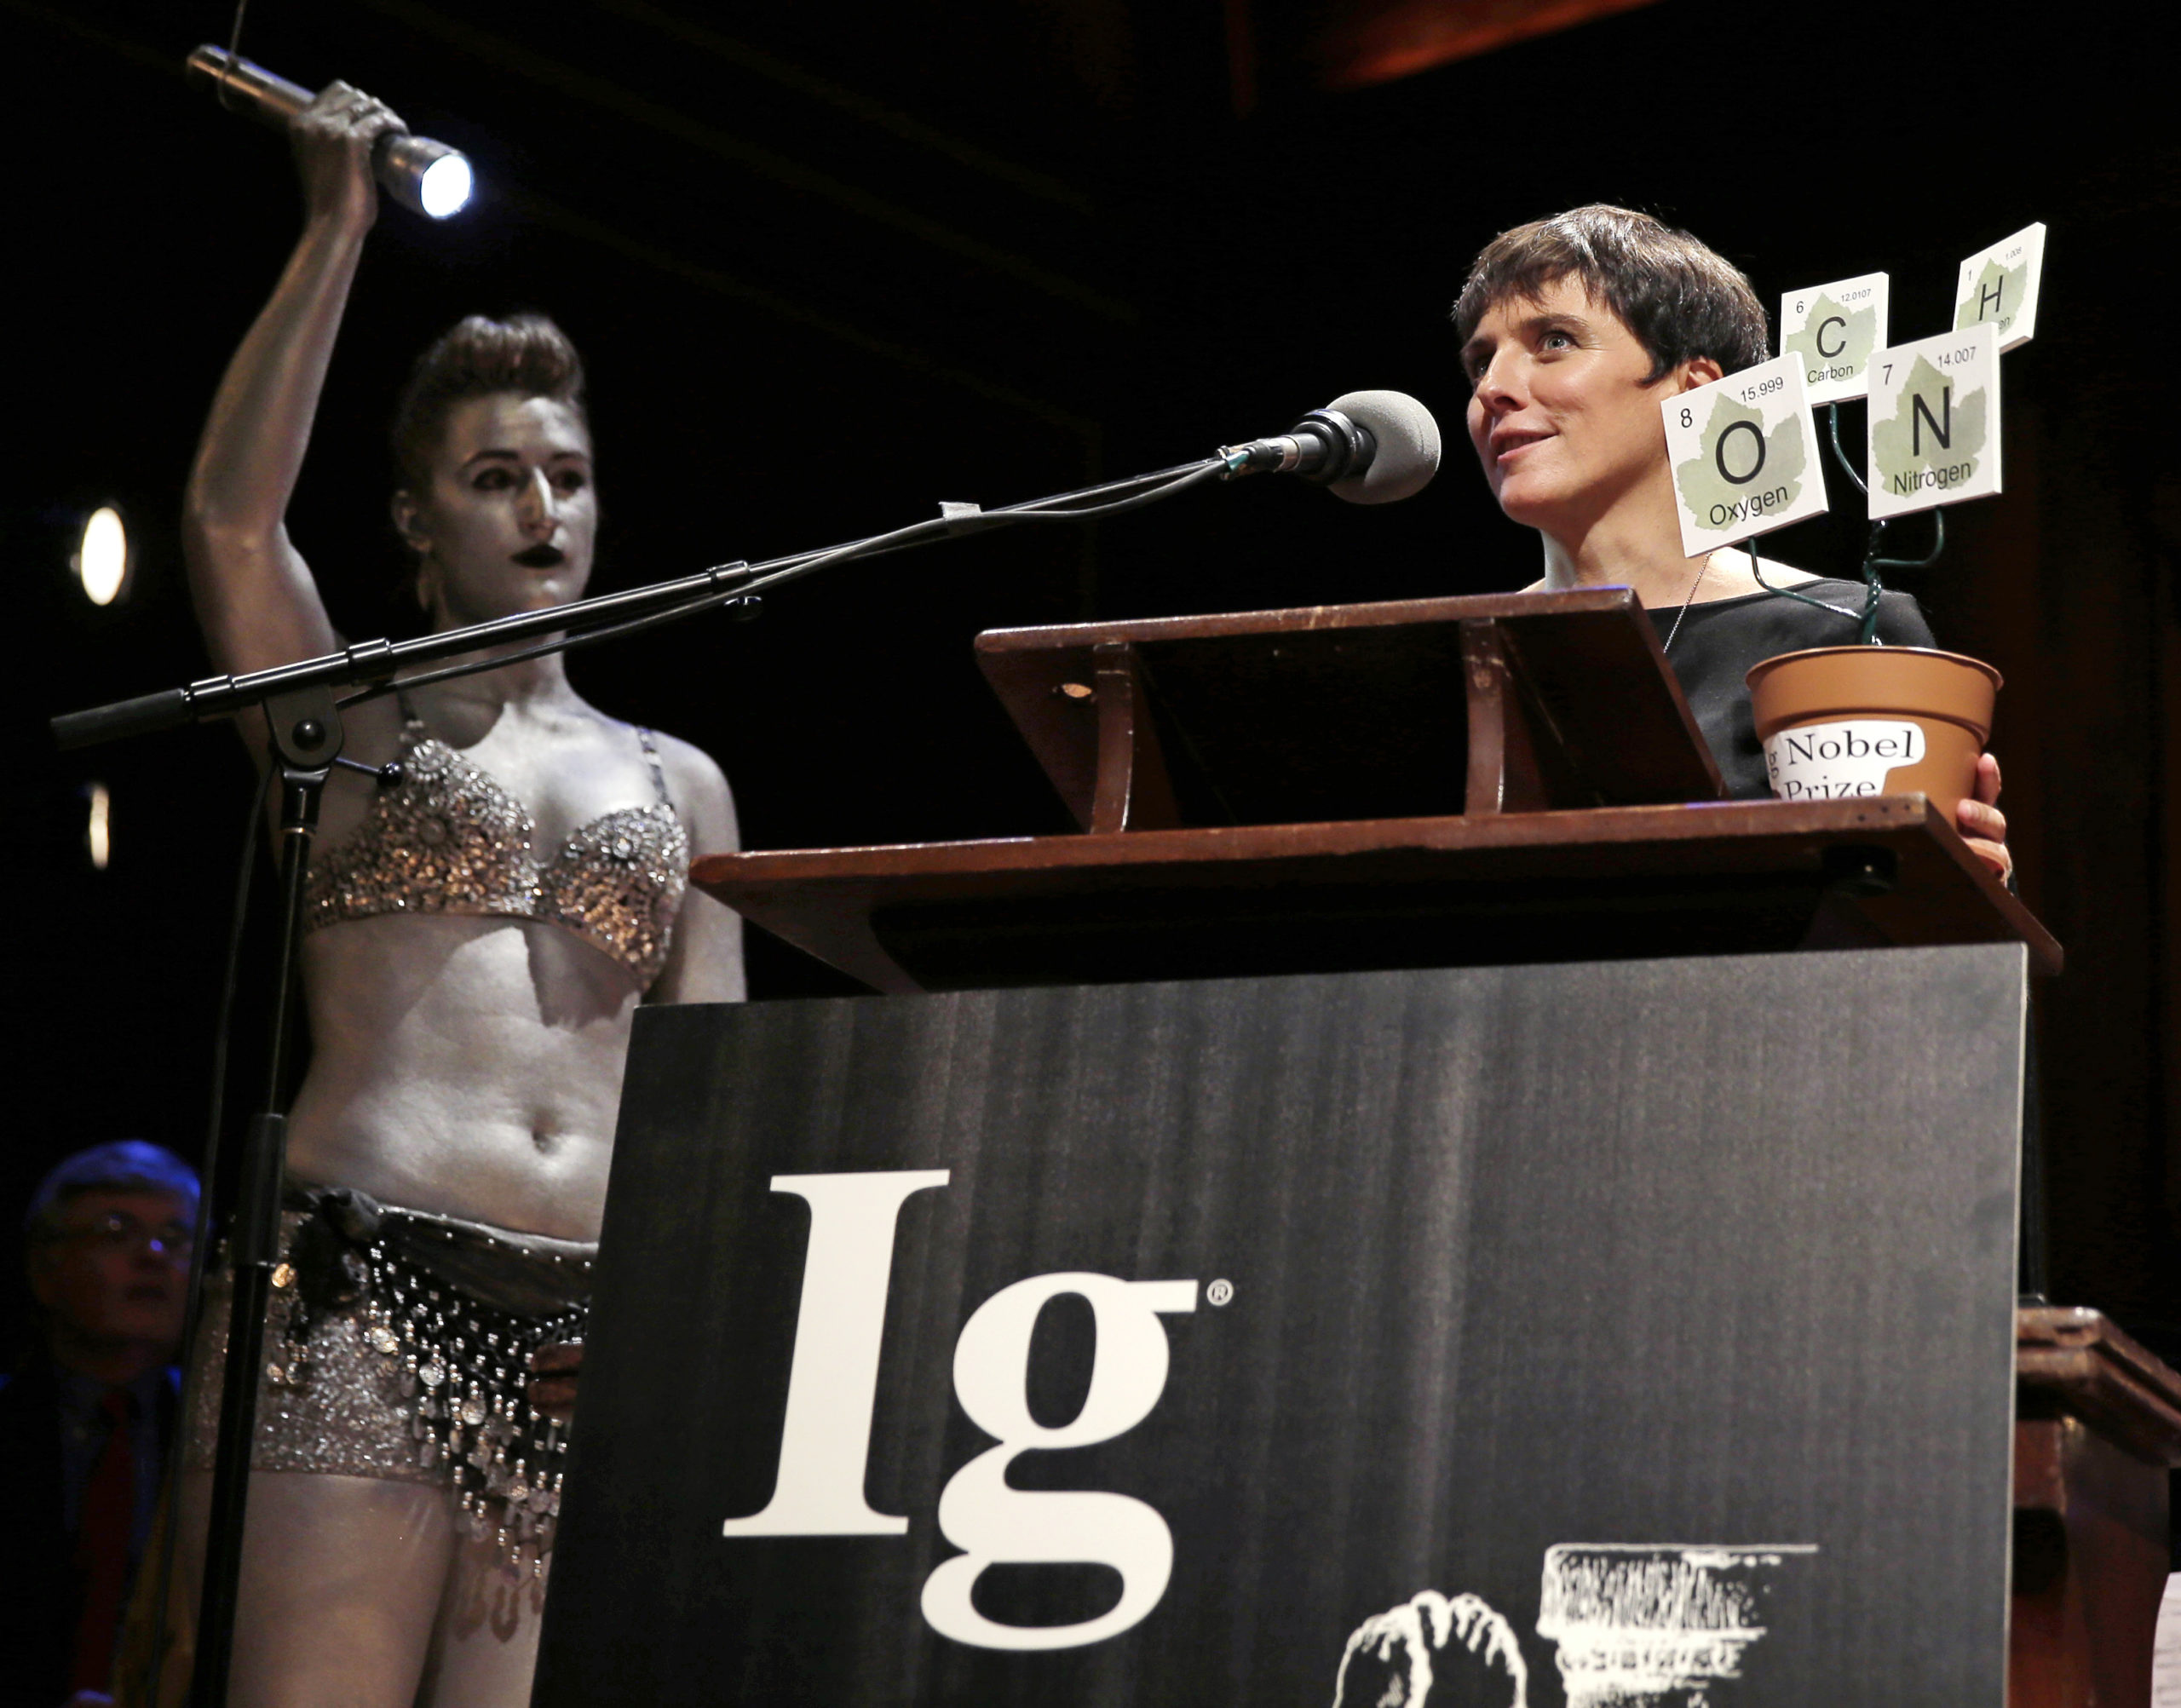 The 25th Ig Nobel Awards Were The Greatest Moment In The History Of (Silly) Science